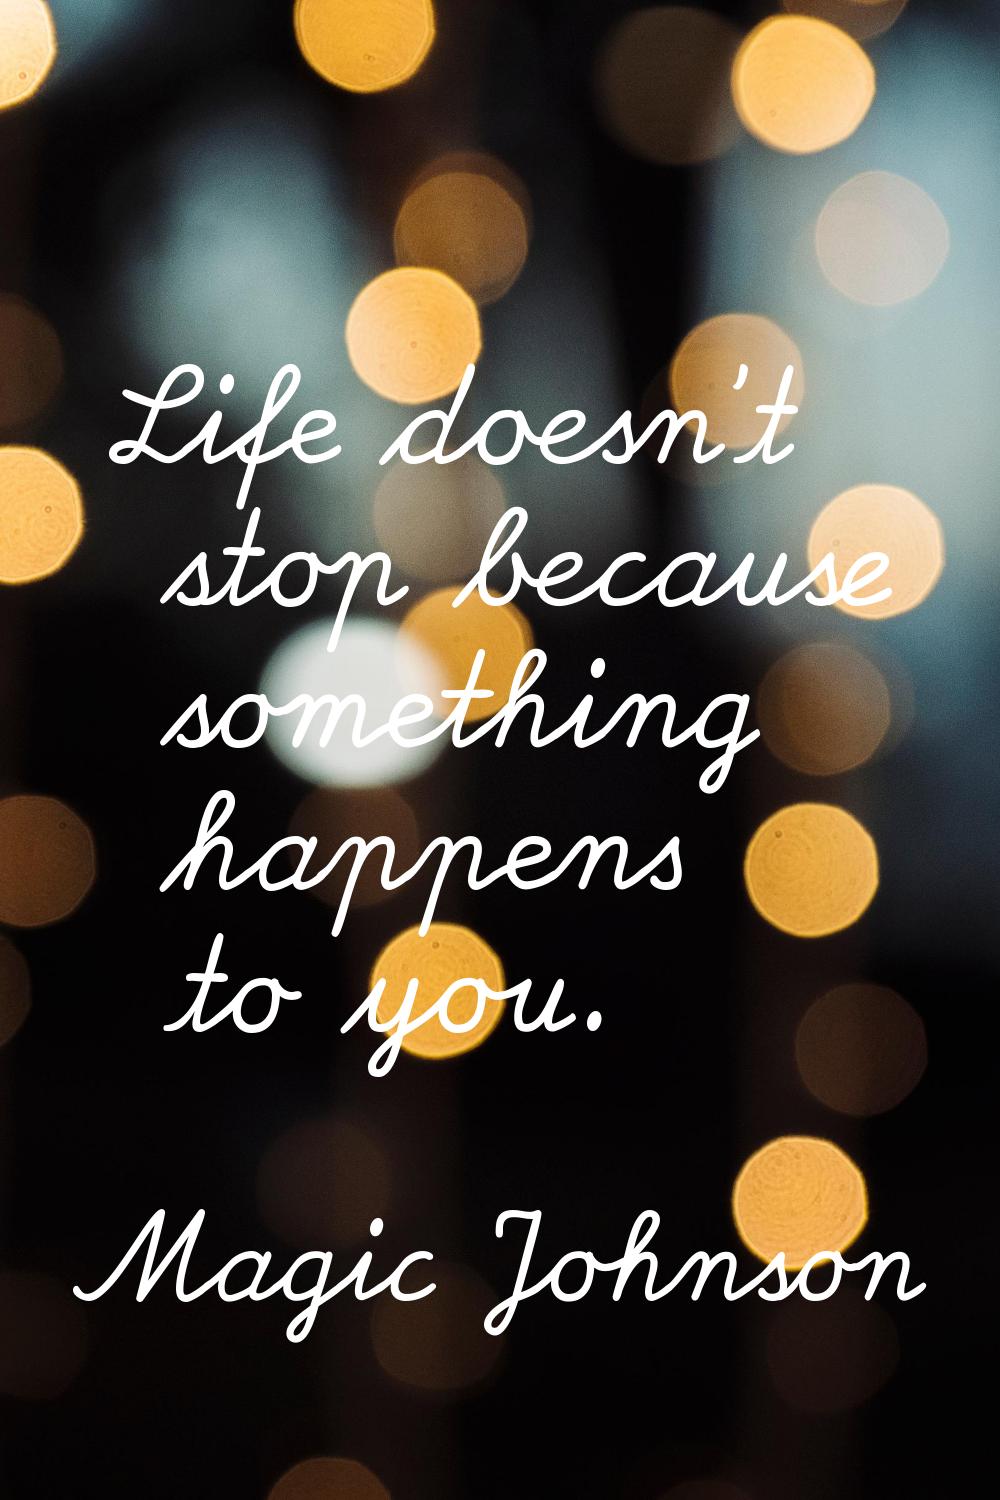 Life doesn't stop because something happens to you.